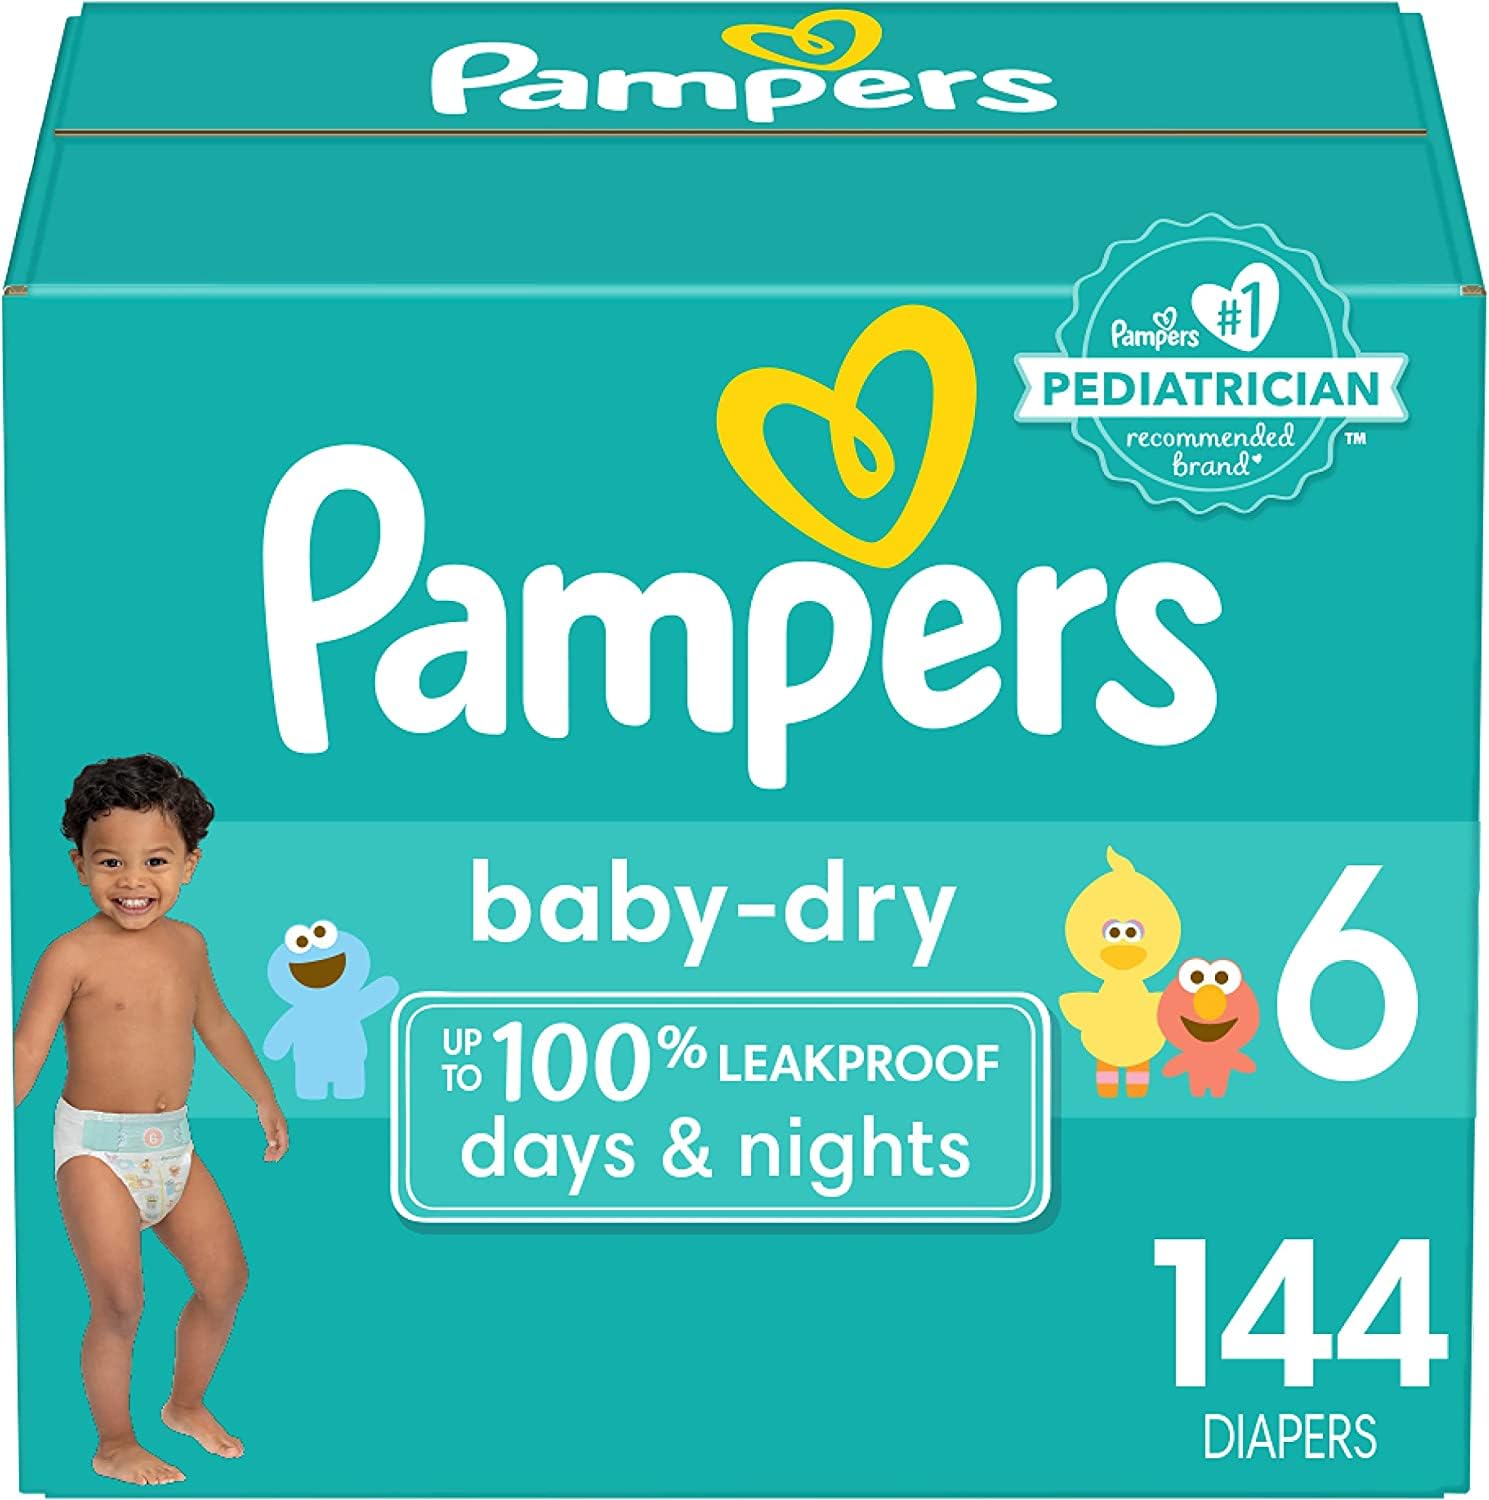 Pampers Pure Protection Diapers Size 3, 26 count - Disposable Diapers